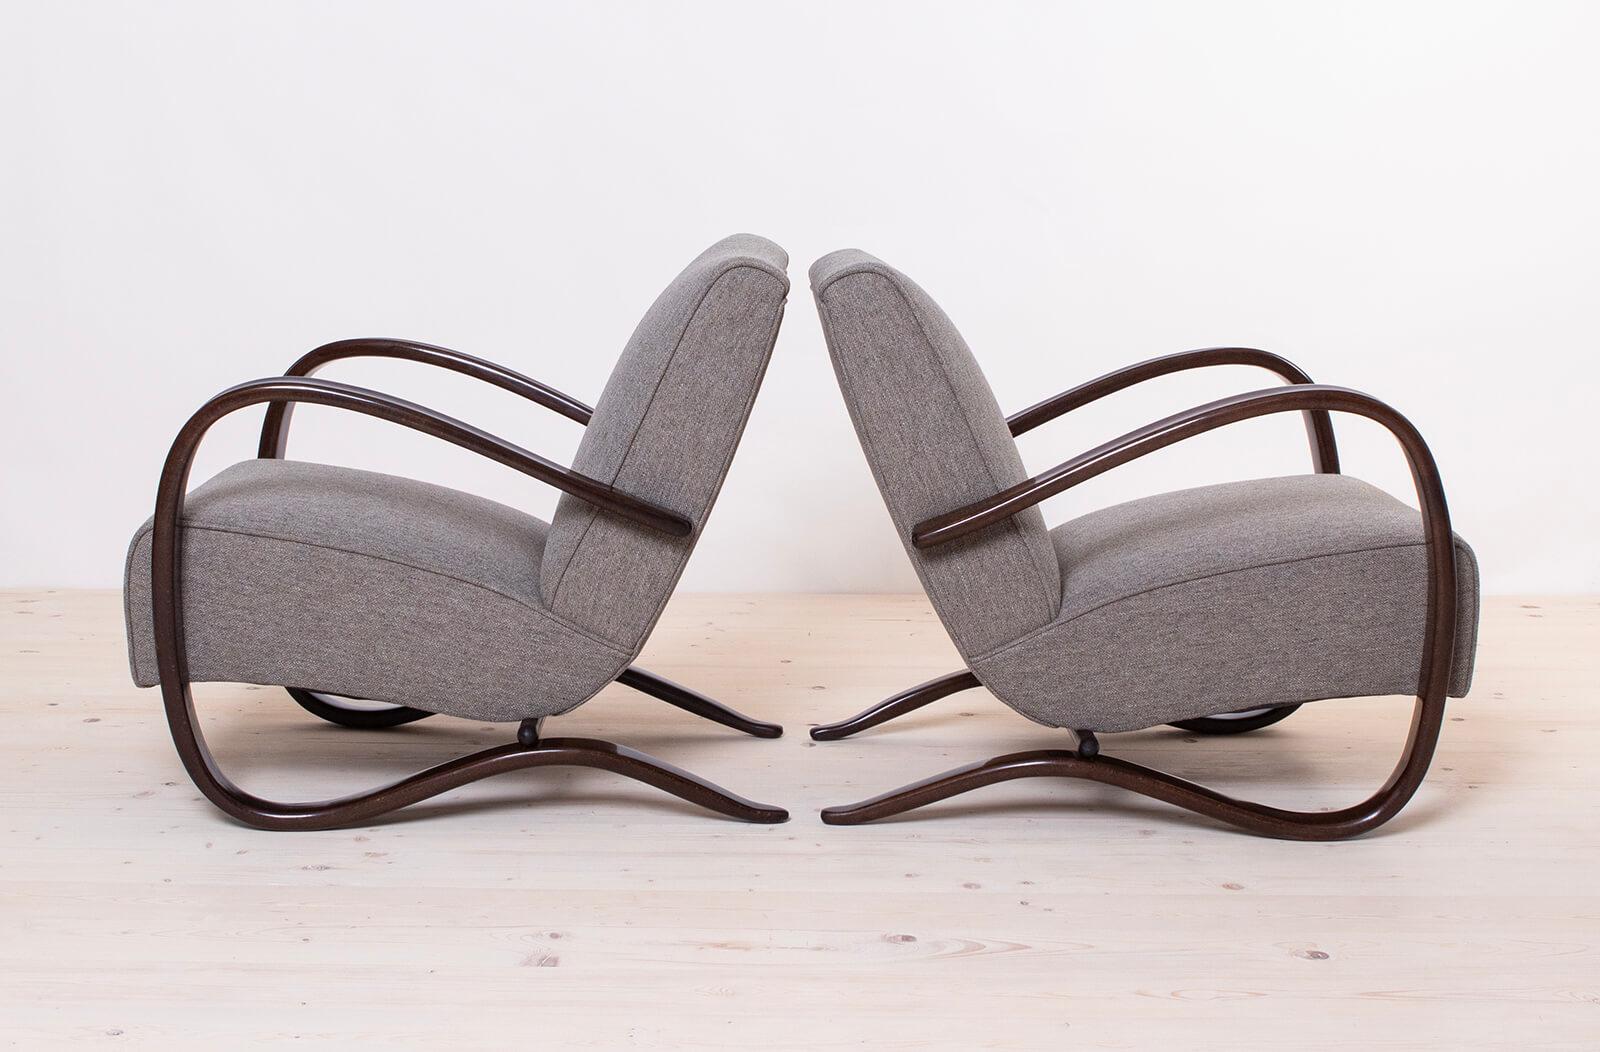 Set of two Art Deco armchairs designed by famous Jindrich Halabala in 1930s in Czechoslovakia. One of his iconic models, H269. The armchairs have been professionally restored, reupholstered in high quality fabric from Danish brand KVADRAT and all